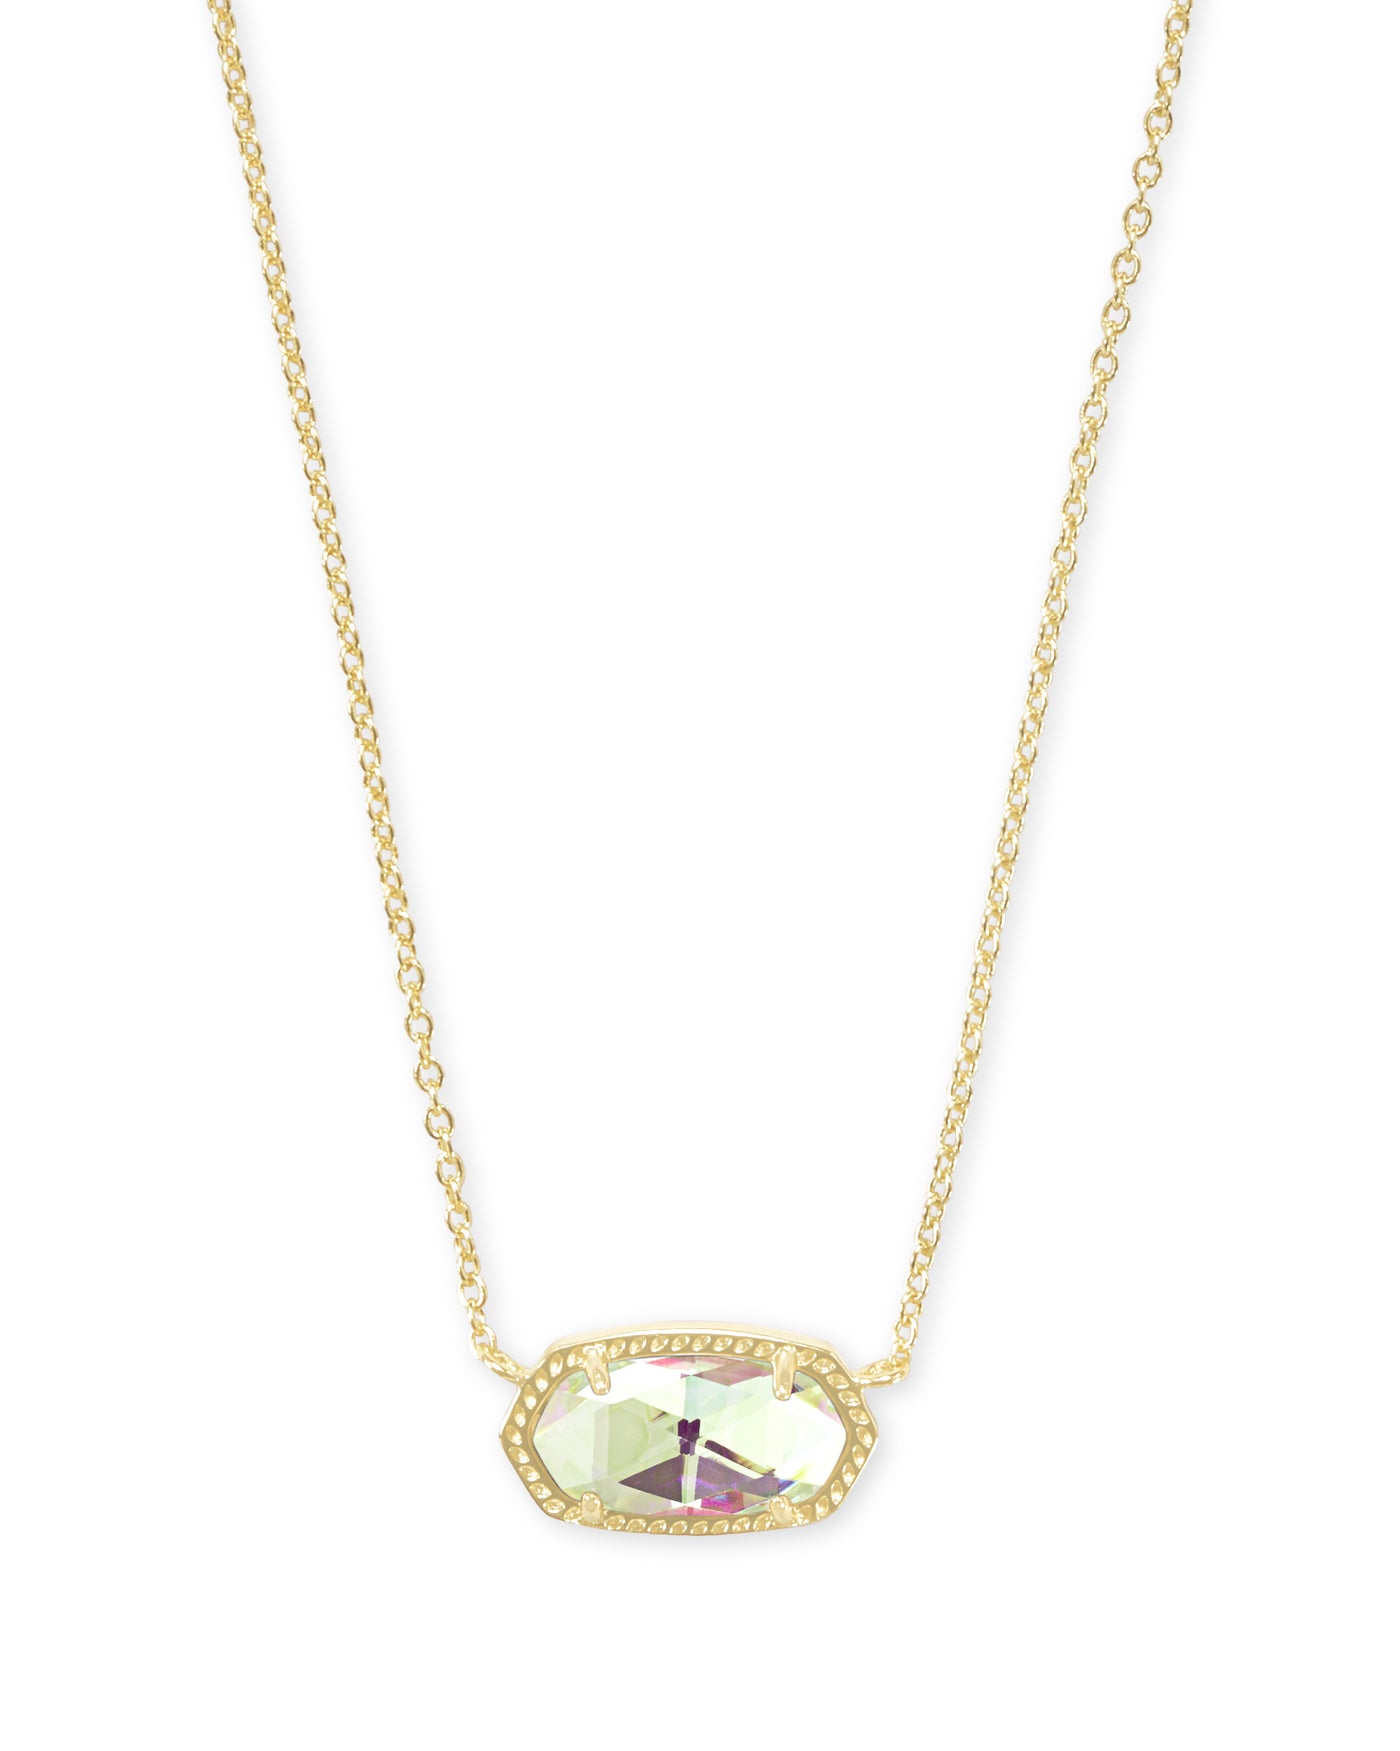 Kendra Scott Elisa Gold Pendant Necklace in Dichroic Glass-Necklaces-Kendra Scott-Market Street Nest, Fashionable Clothing, Shoes and Home Décor Located in Mabank, TX